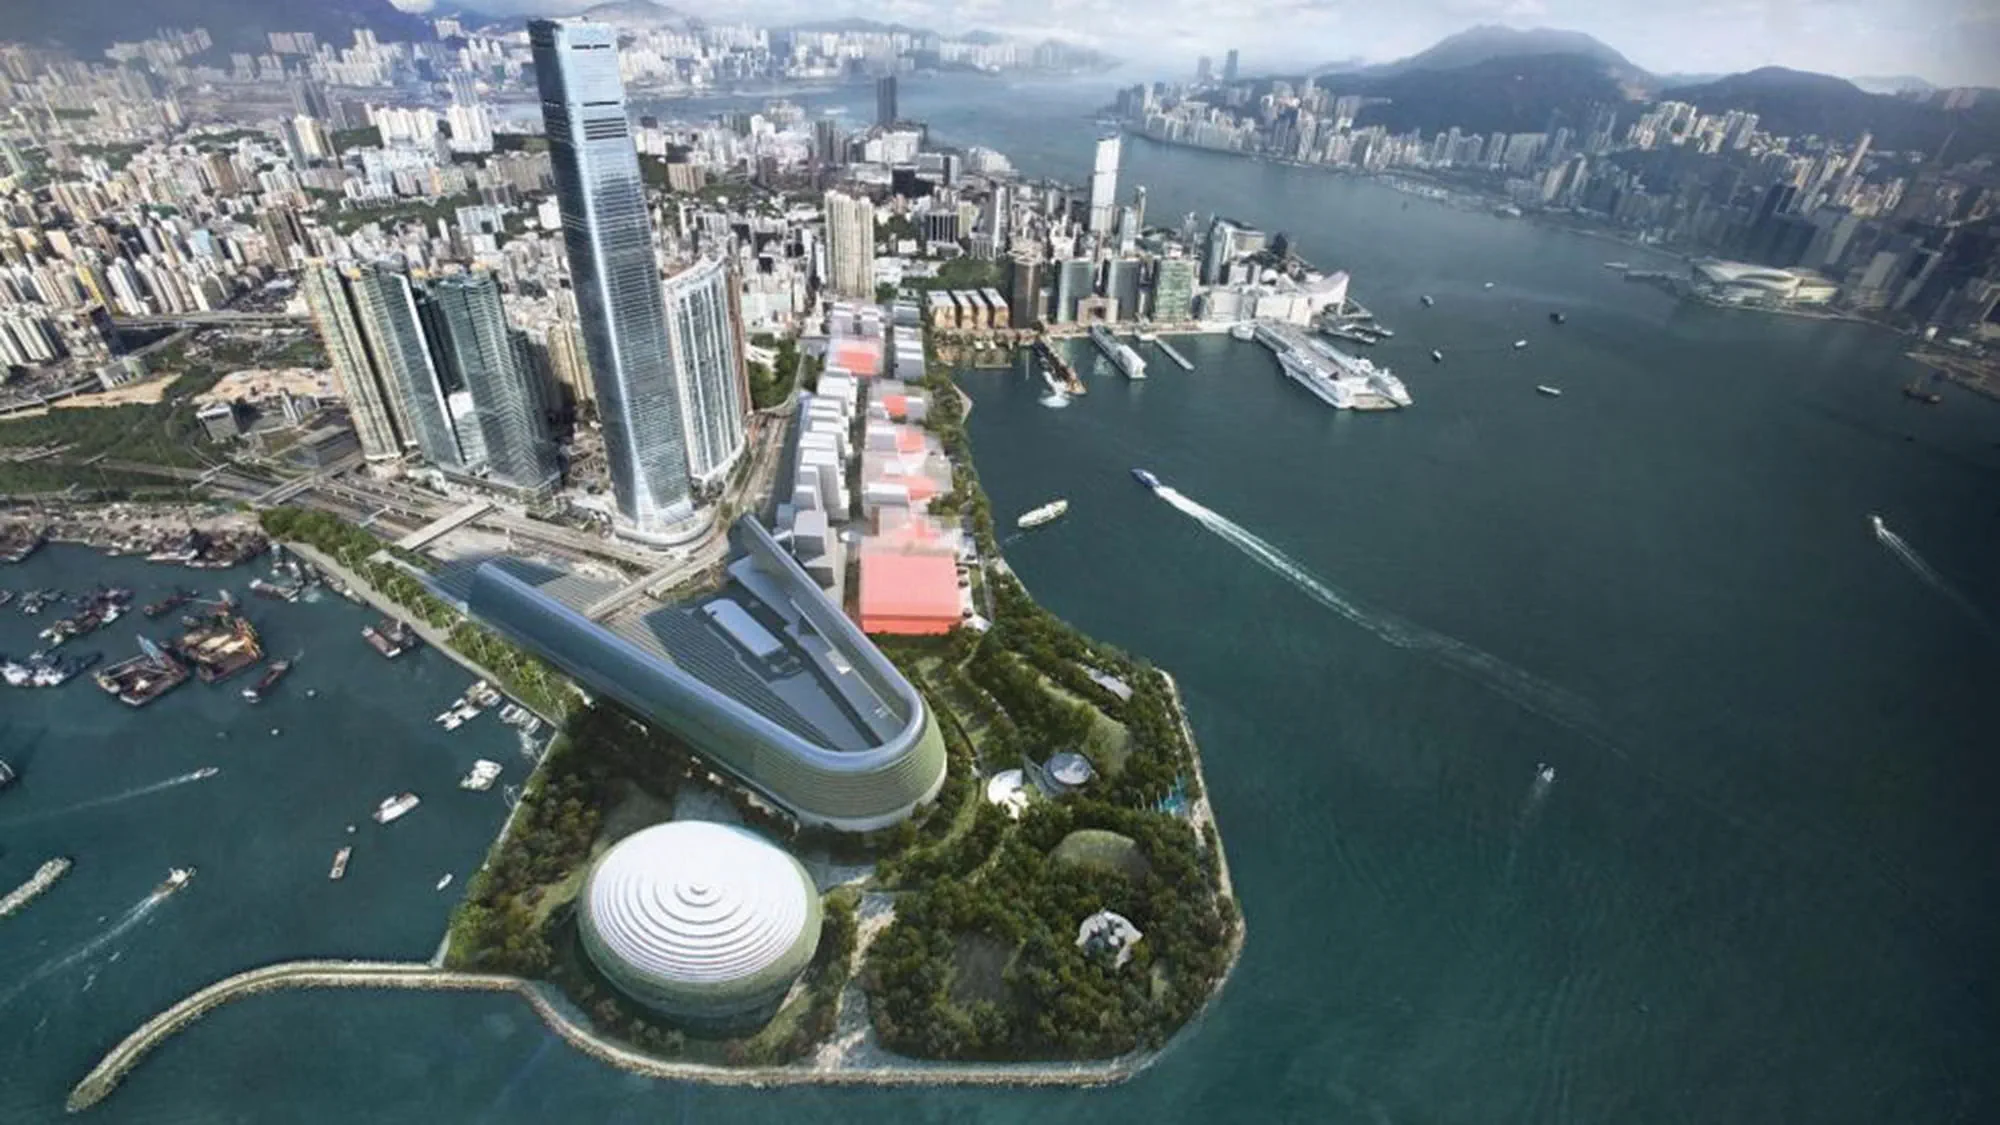 District-wide ELV Systems Strategy for West Kowloon Cultural District ©West Kowloon Cultural District Authority